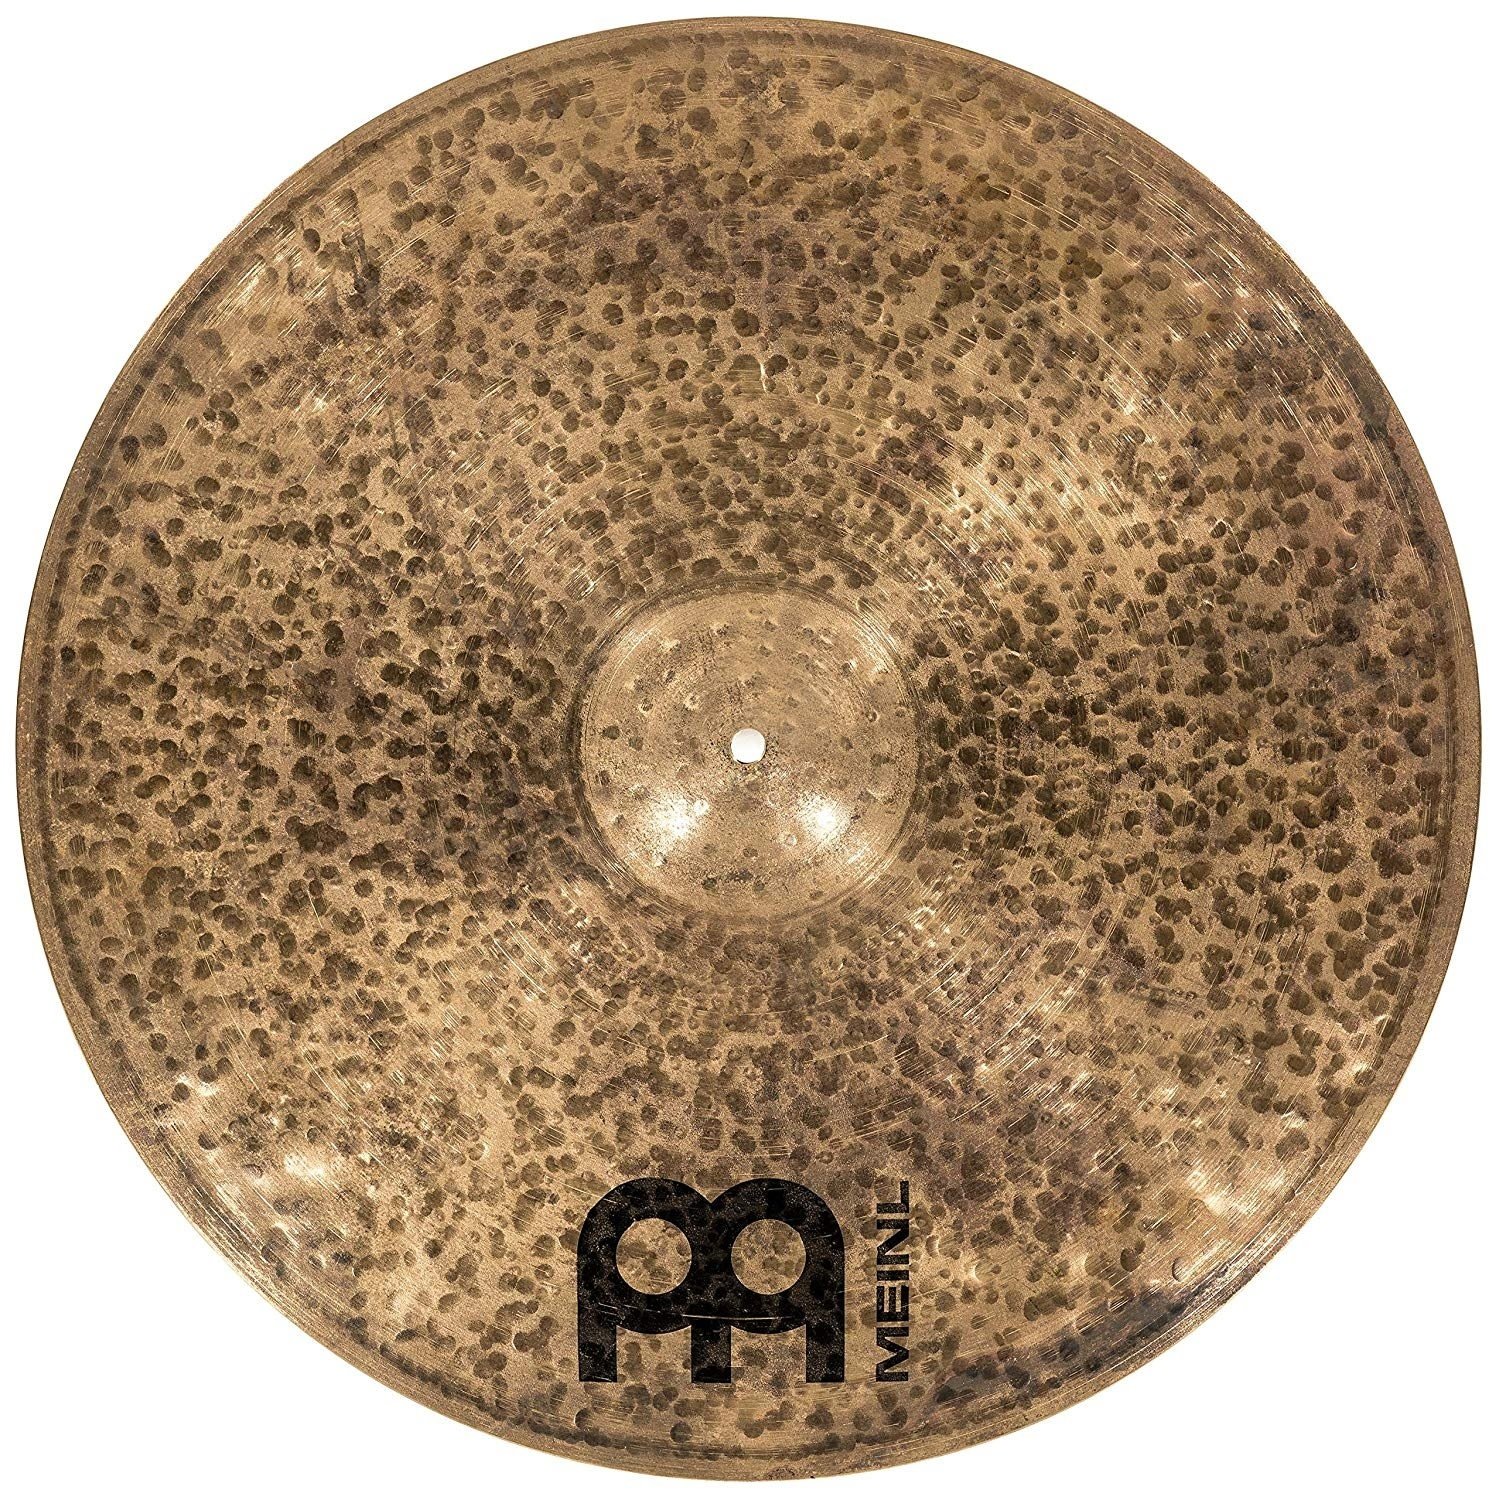 MEINL Cymbals マイネル Byzance Extra Dry Series クラッシュシンバル